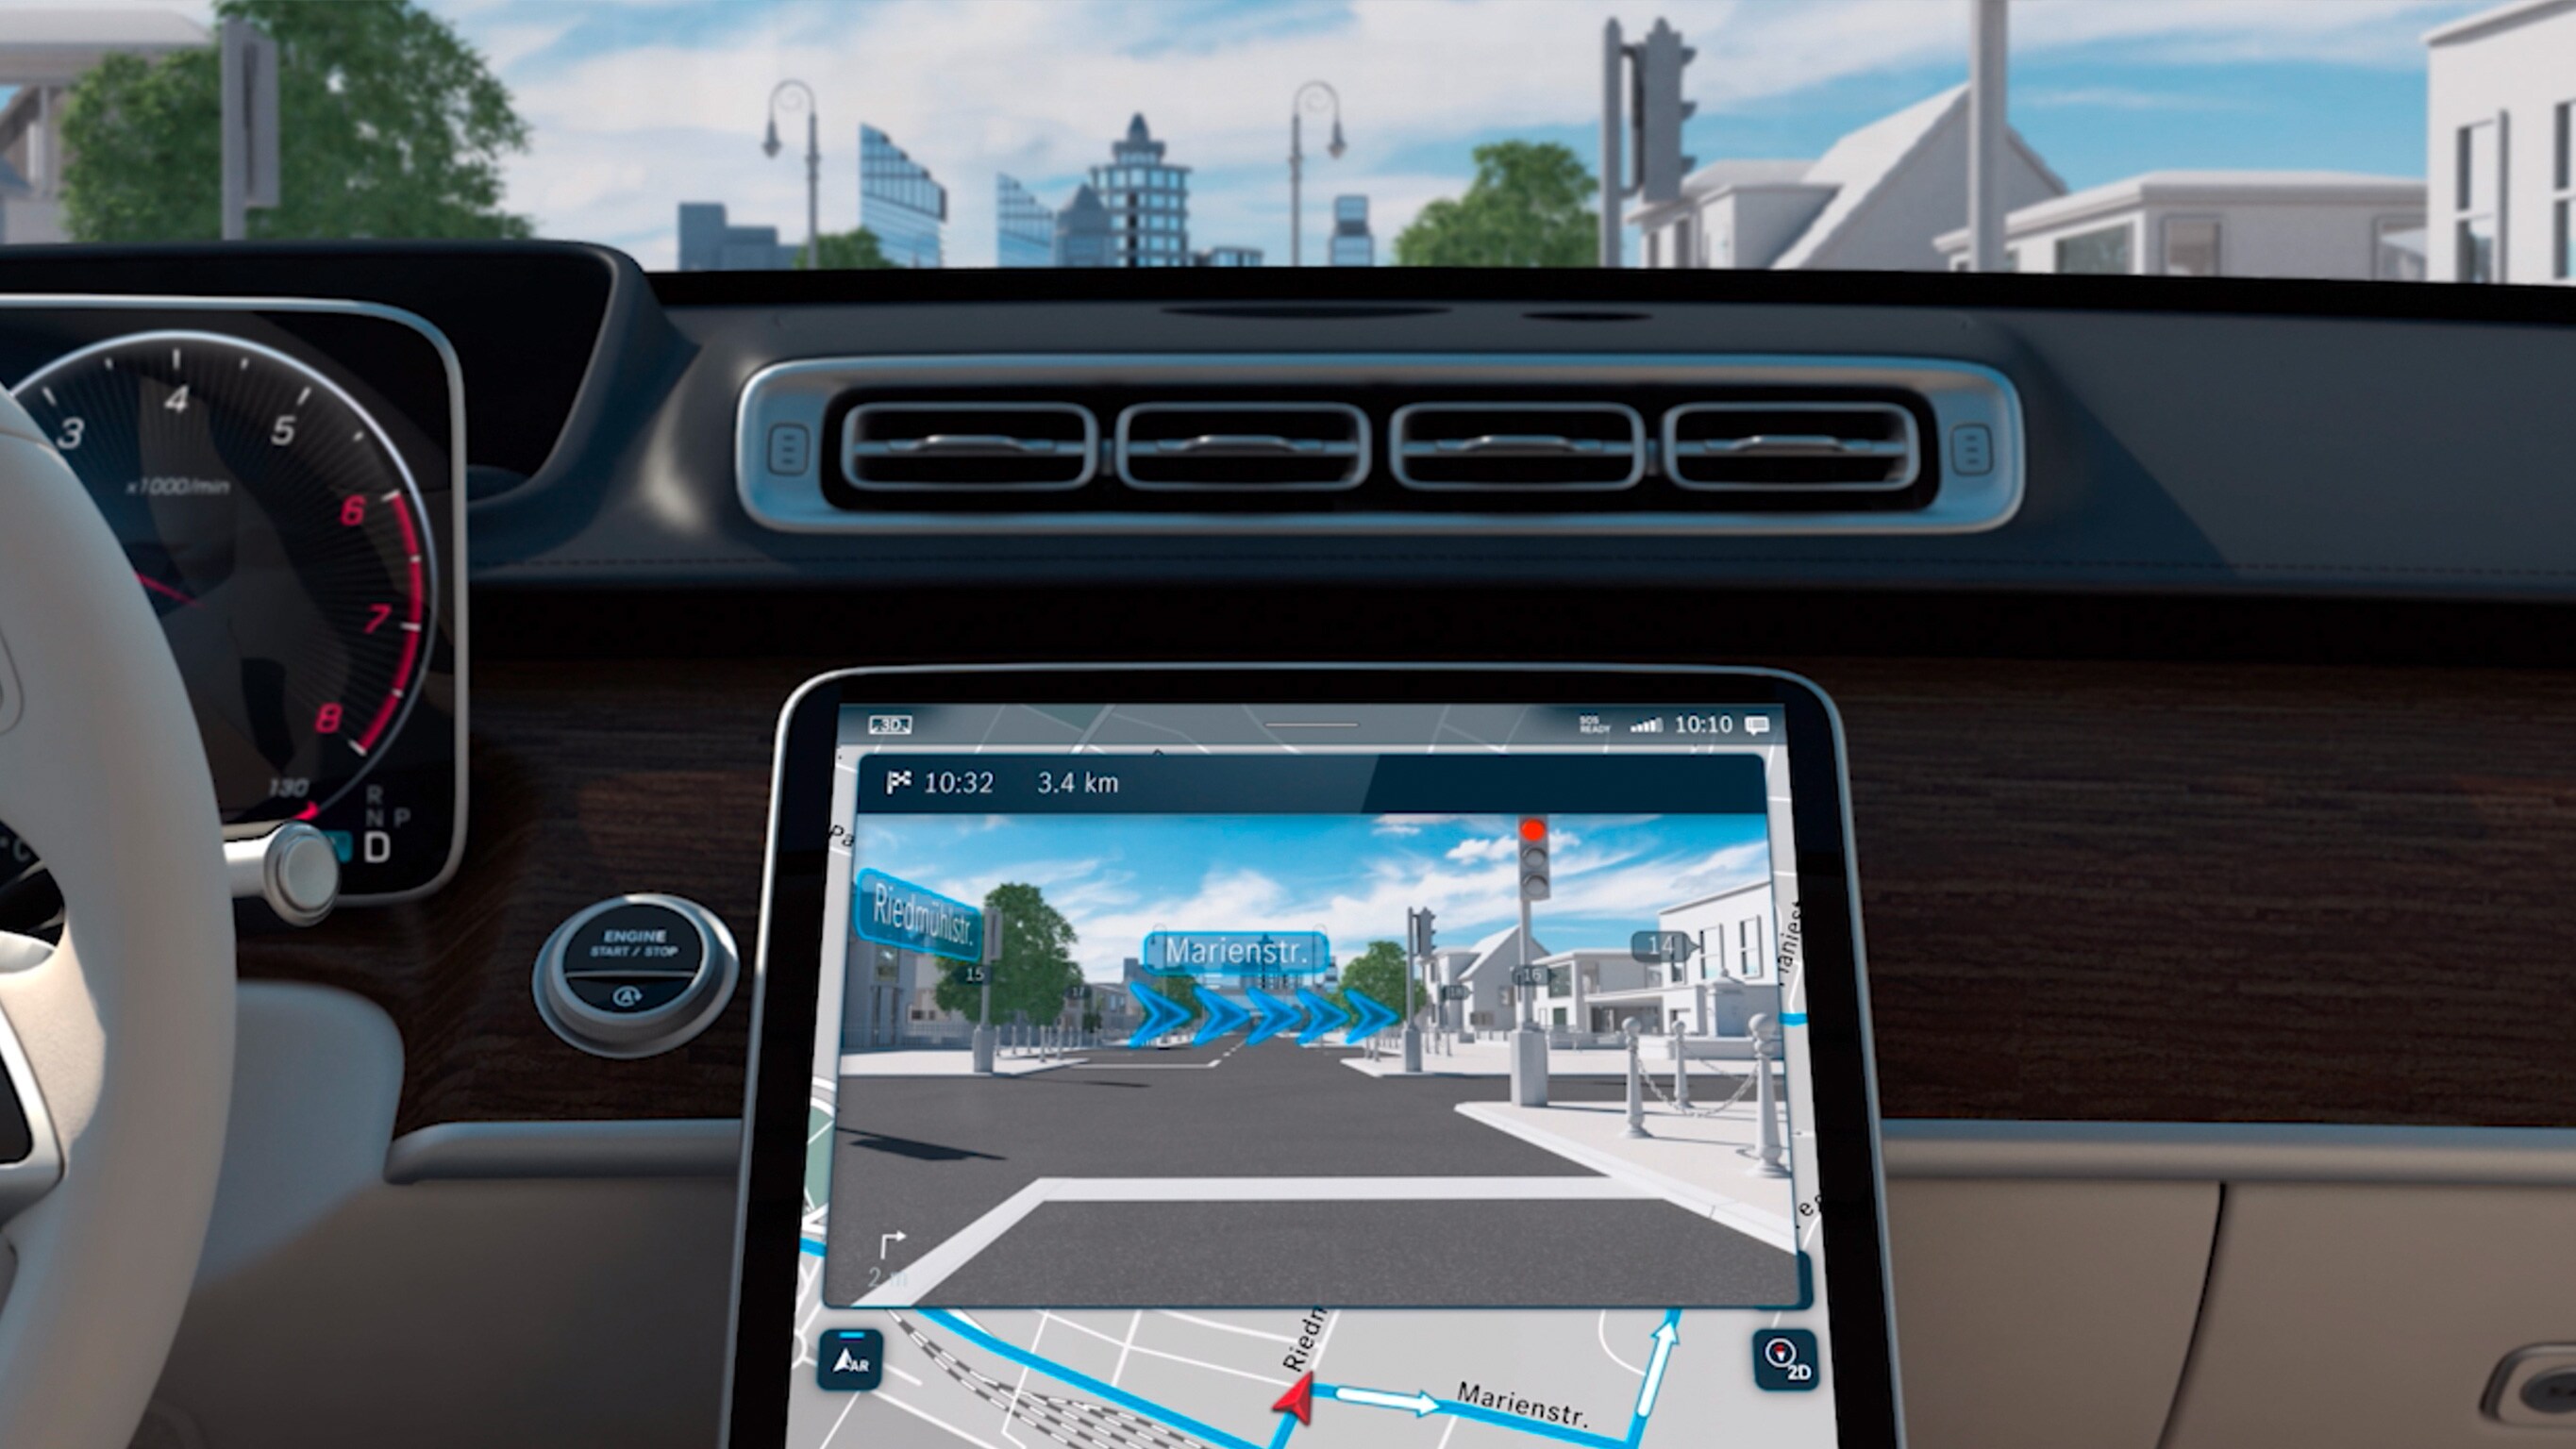 The video shows the functions of the MBUX Augmented Reality Navigation.